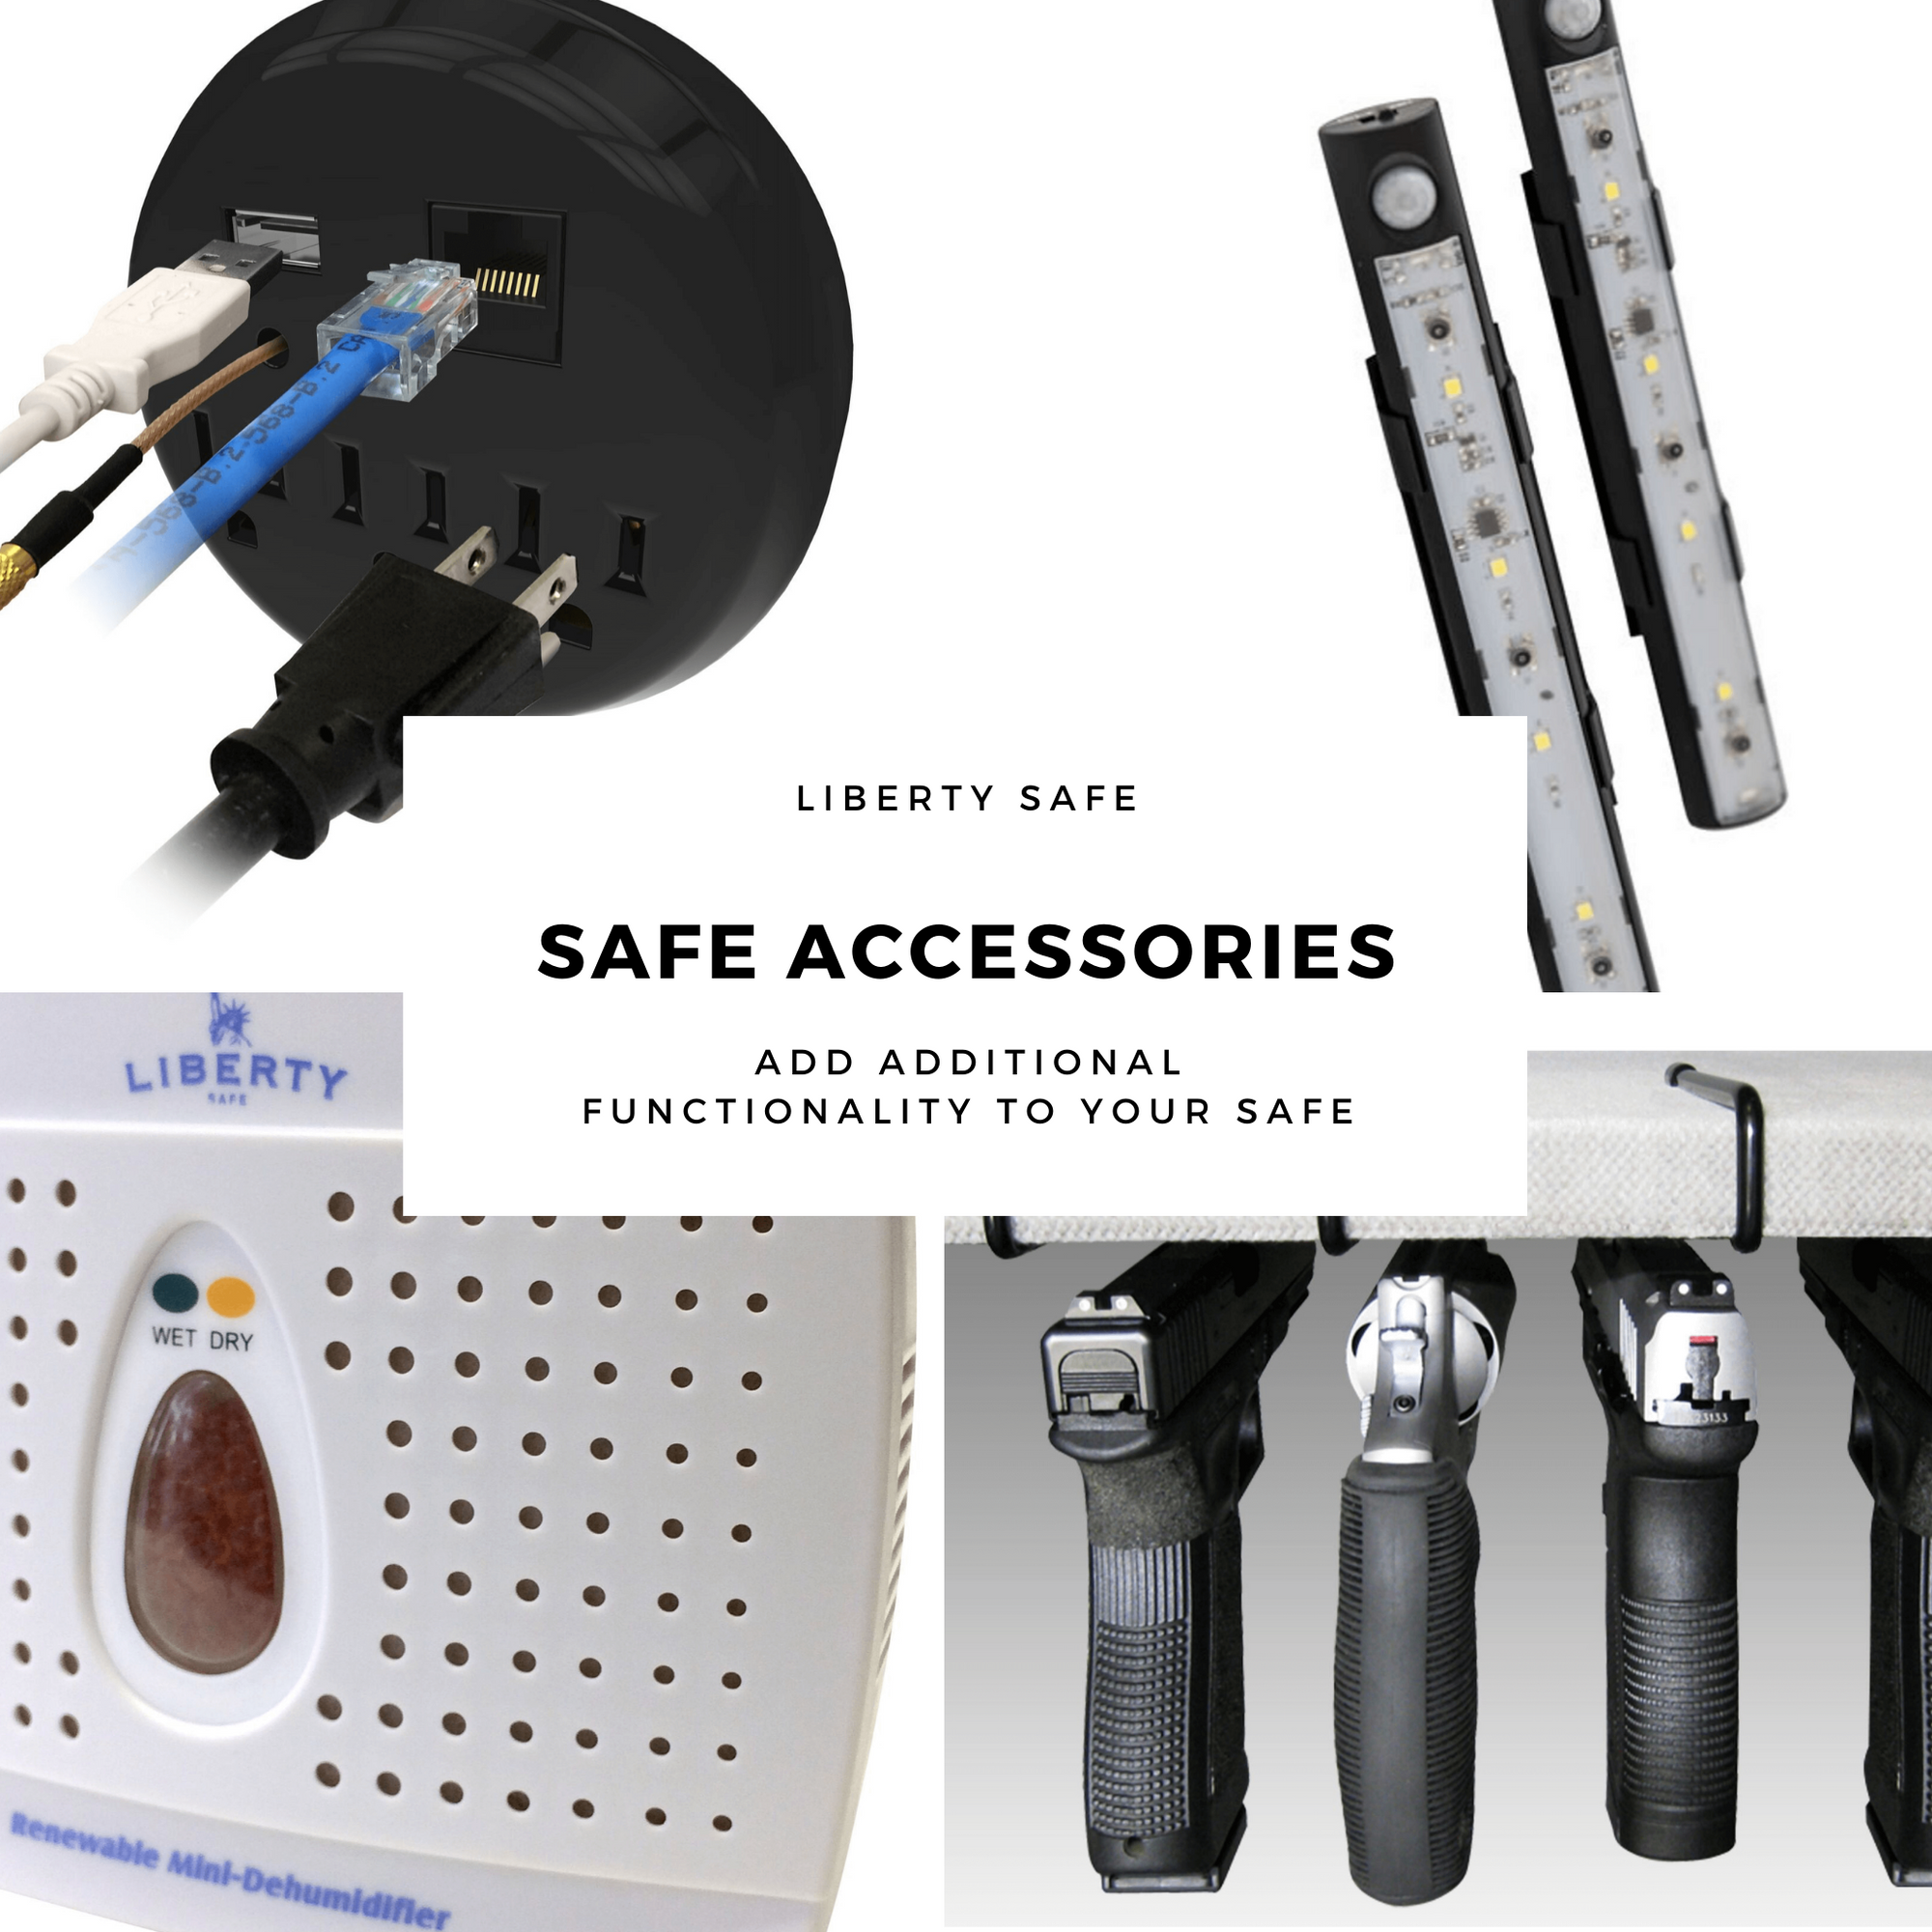 Accessories to upgrade your safe